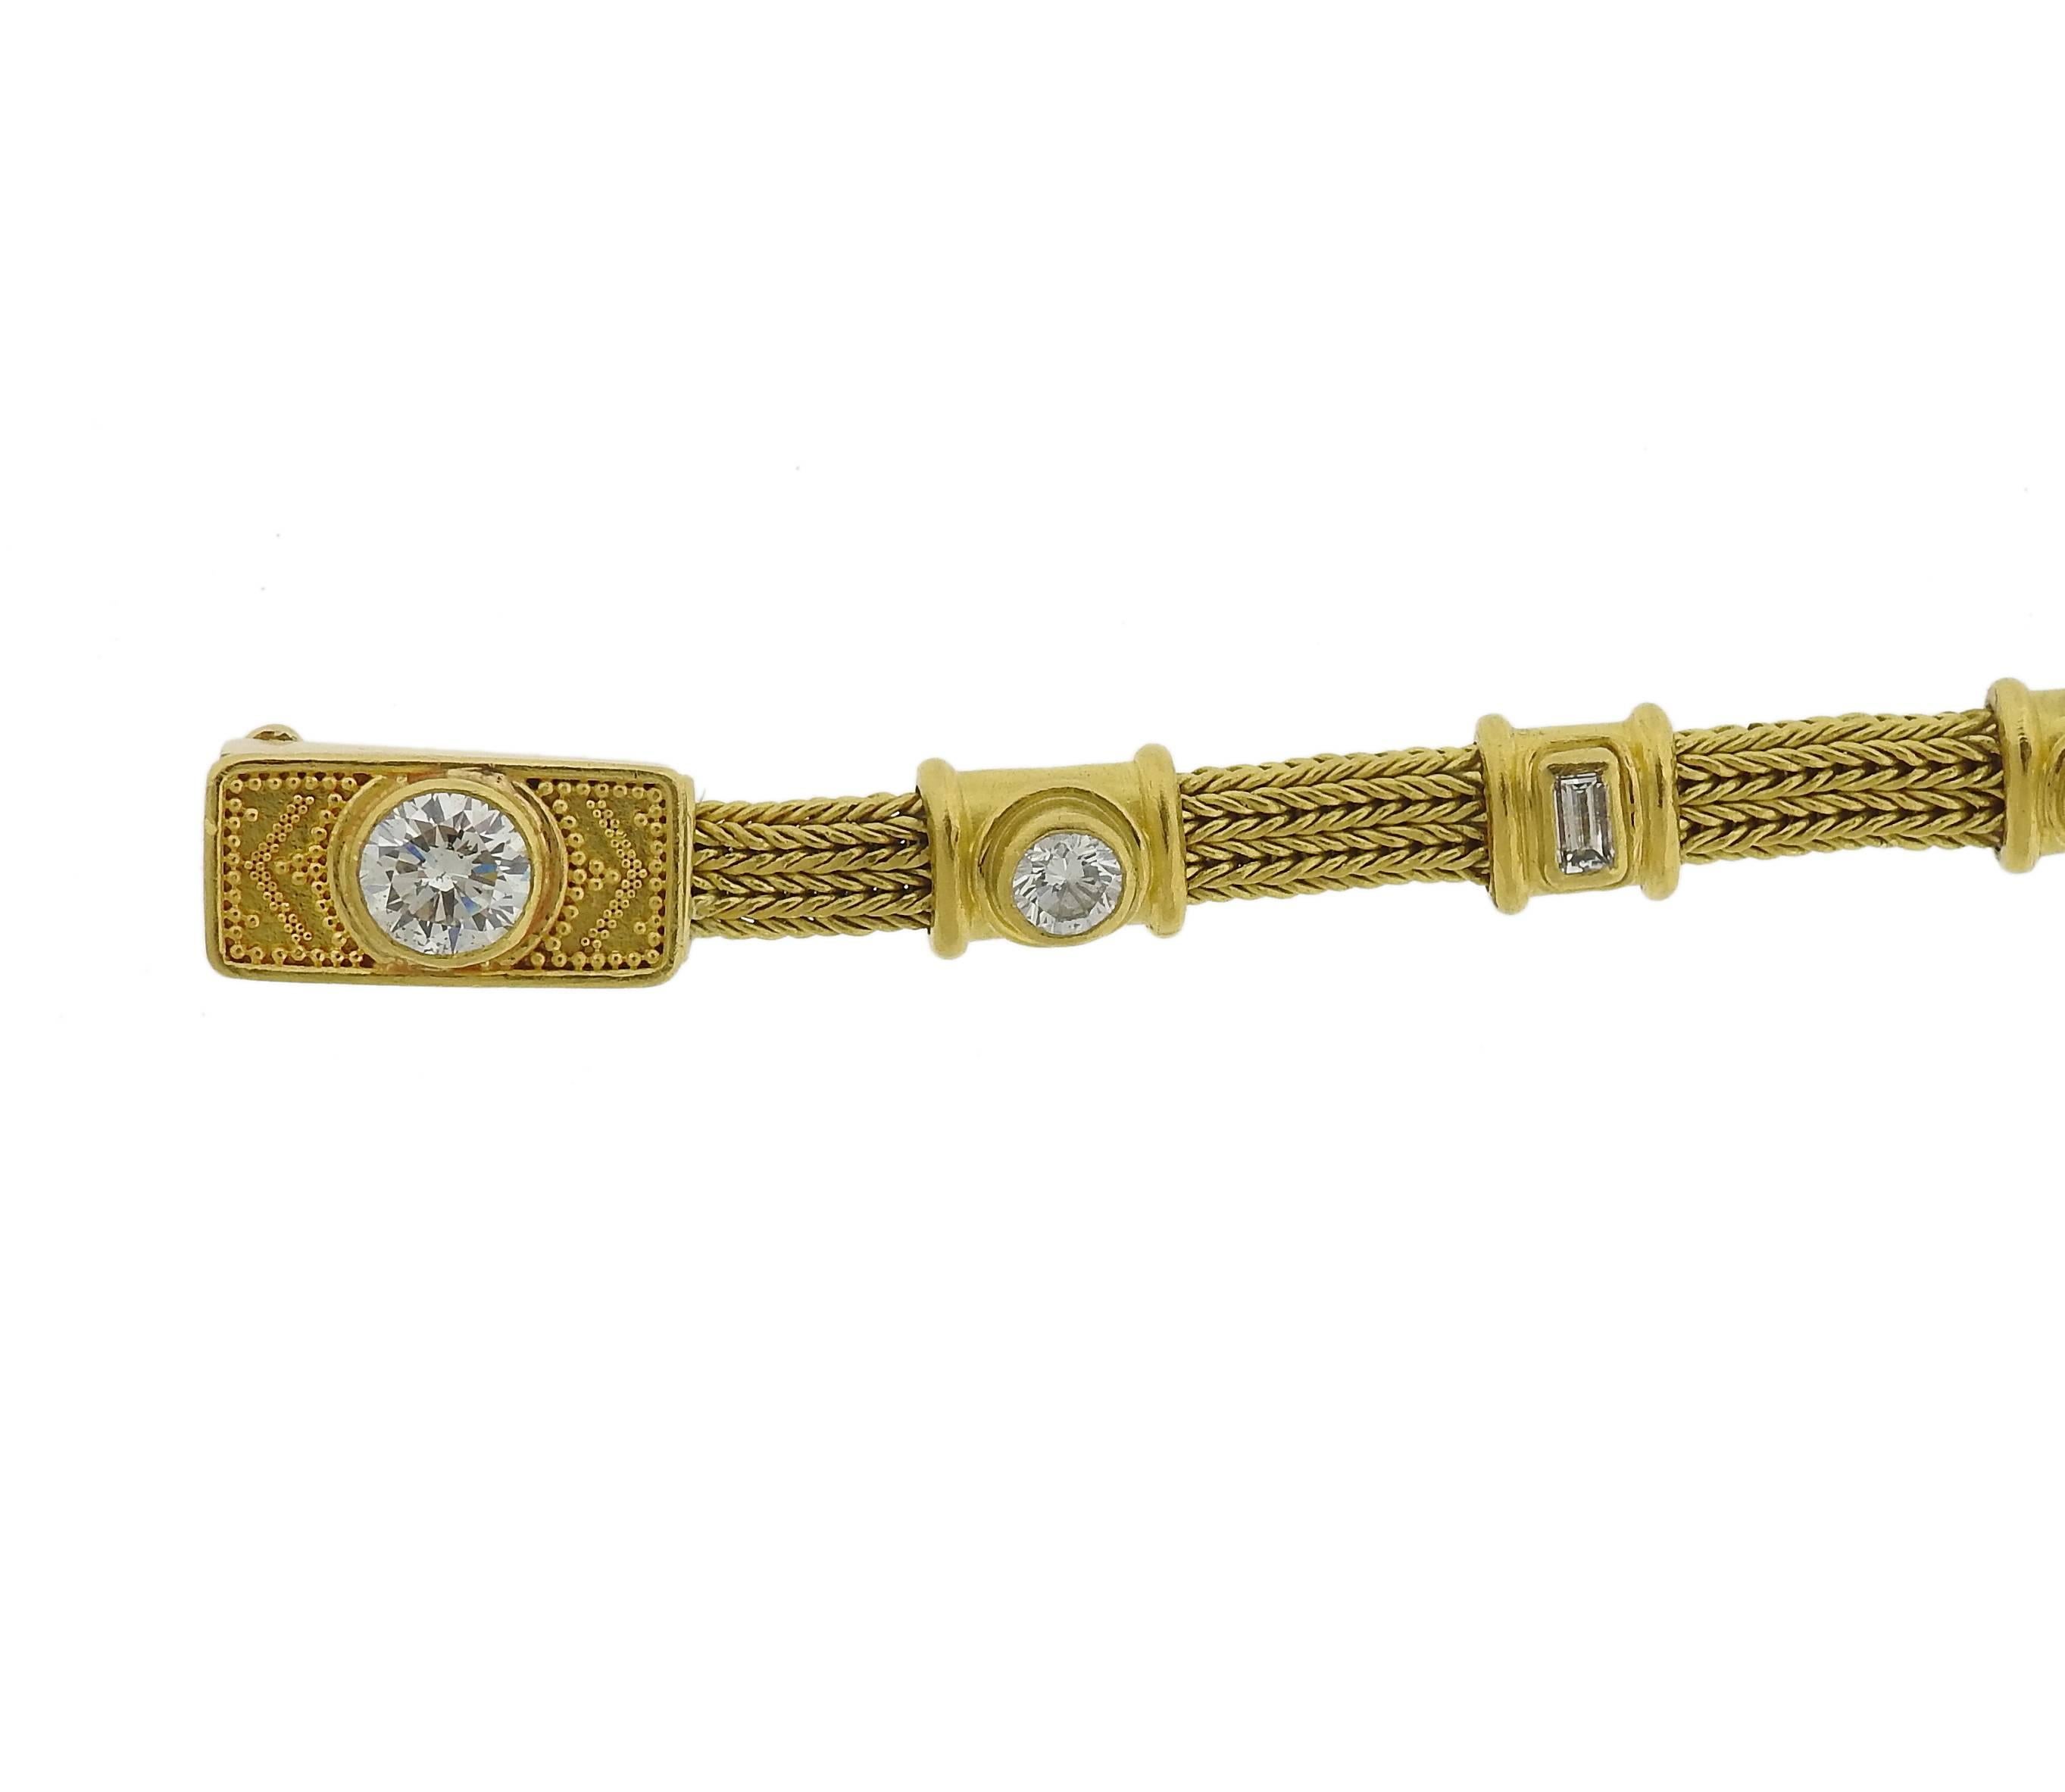 An 18k and 22k yellow gold bracelet, crafted by Bikakis & Johns. Granulation, repoussée, filigree and chain making are all time-honored jewelry making techniques that continue to live through the elegant work of master goldsmiths and jewelry